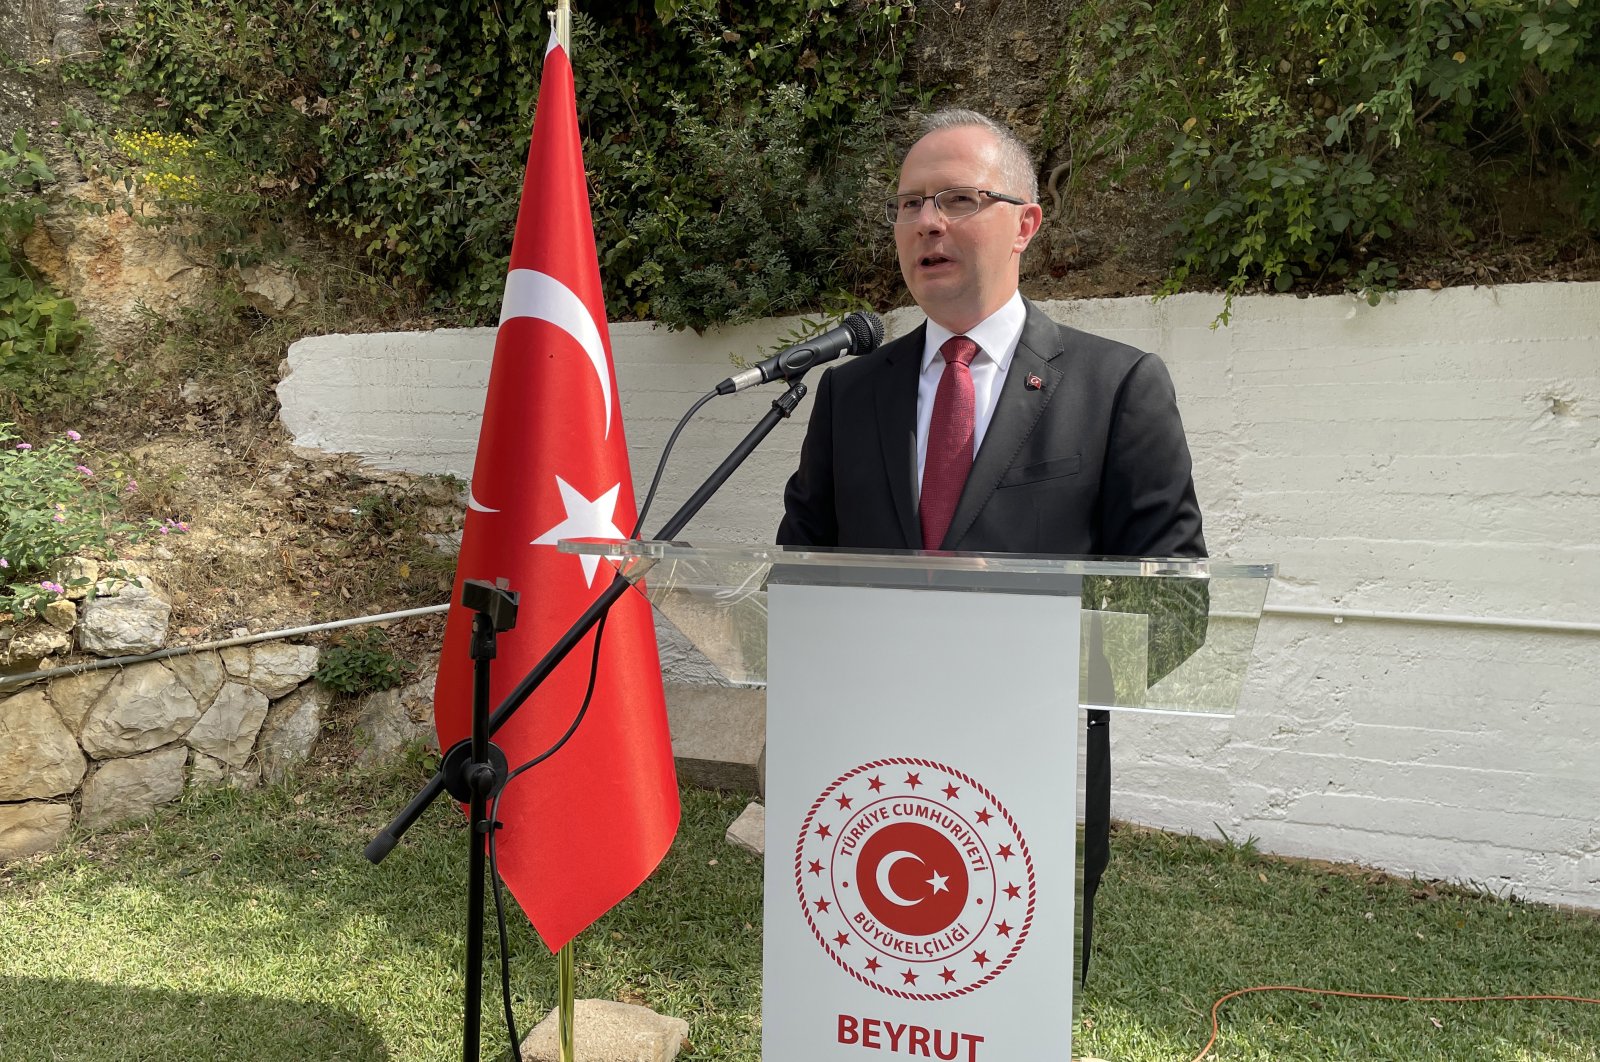 Turkey's envoy to Lebanon Ali Barış Ulusoy speaking at a reception on the 98th anniversary of the establishment of the Turkish Republic, on Oct. 29, 2021 (AA Photo)